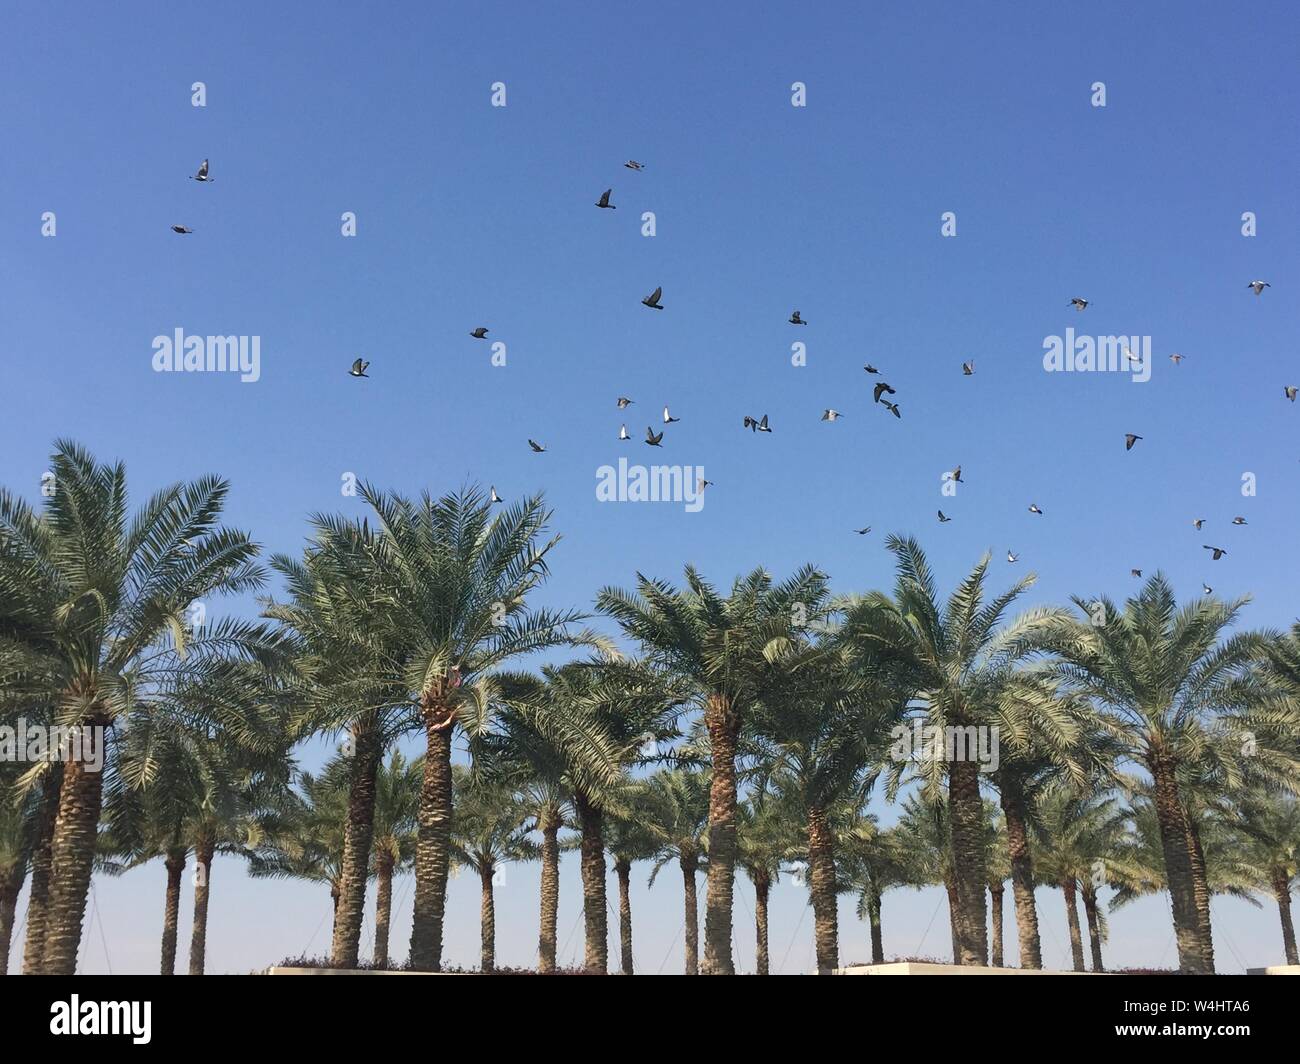 A flock of birds flying above rows of palm trees, with a clear blue sky in the background. Stock Photo